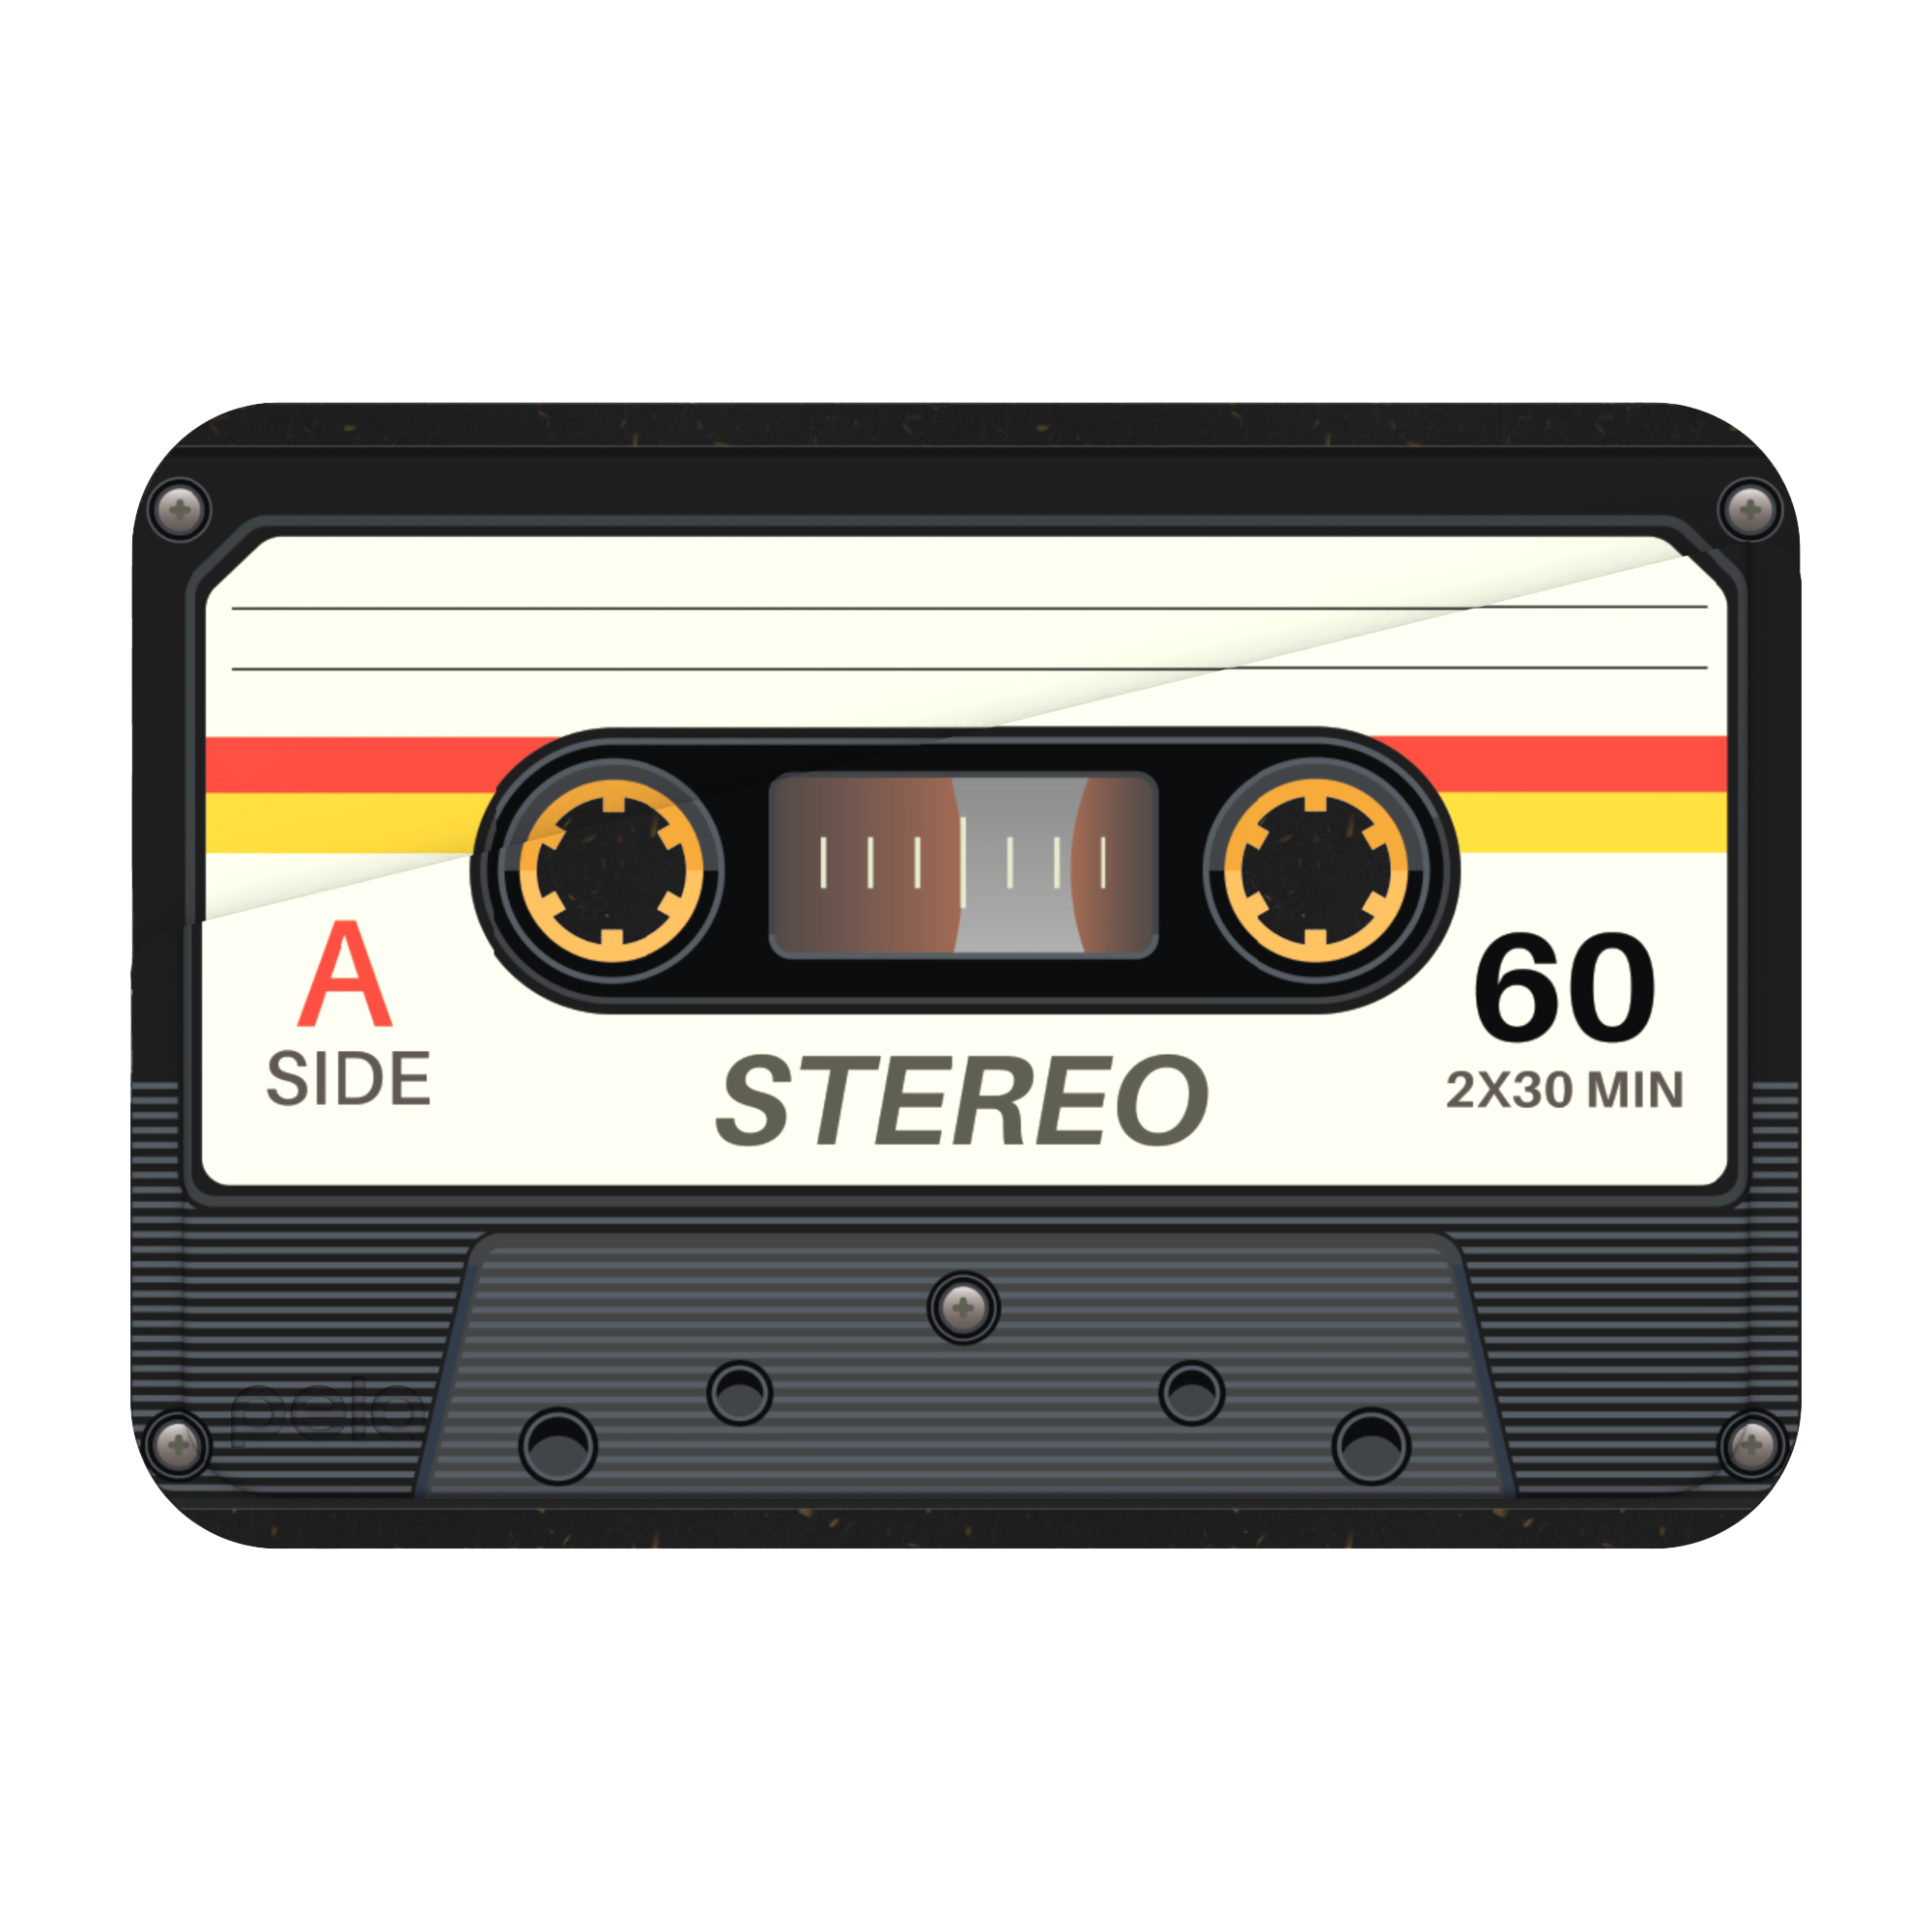 Illustration of a classic cassette tape with 'STEREO' text and 'A SIDE' label.